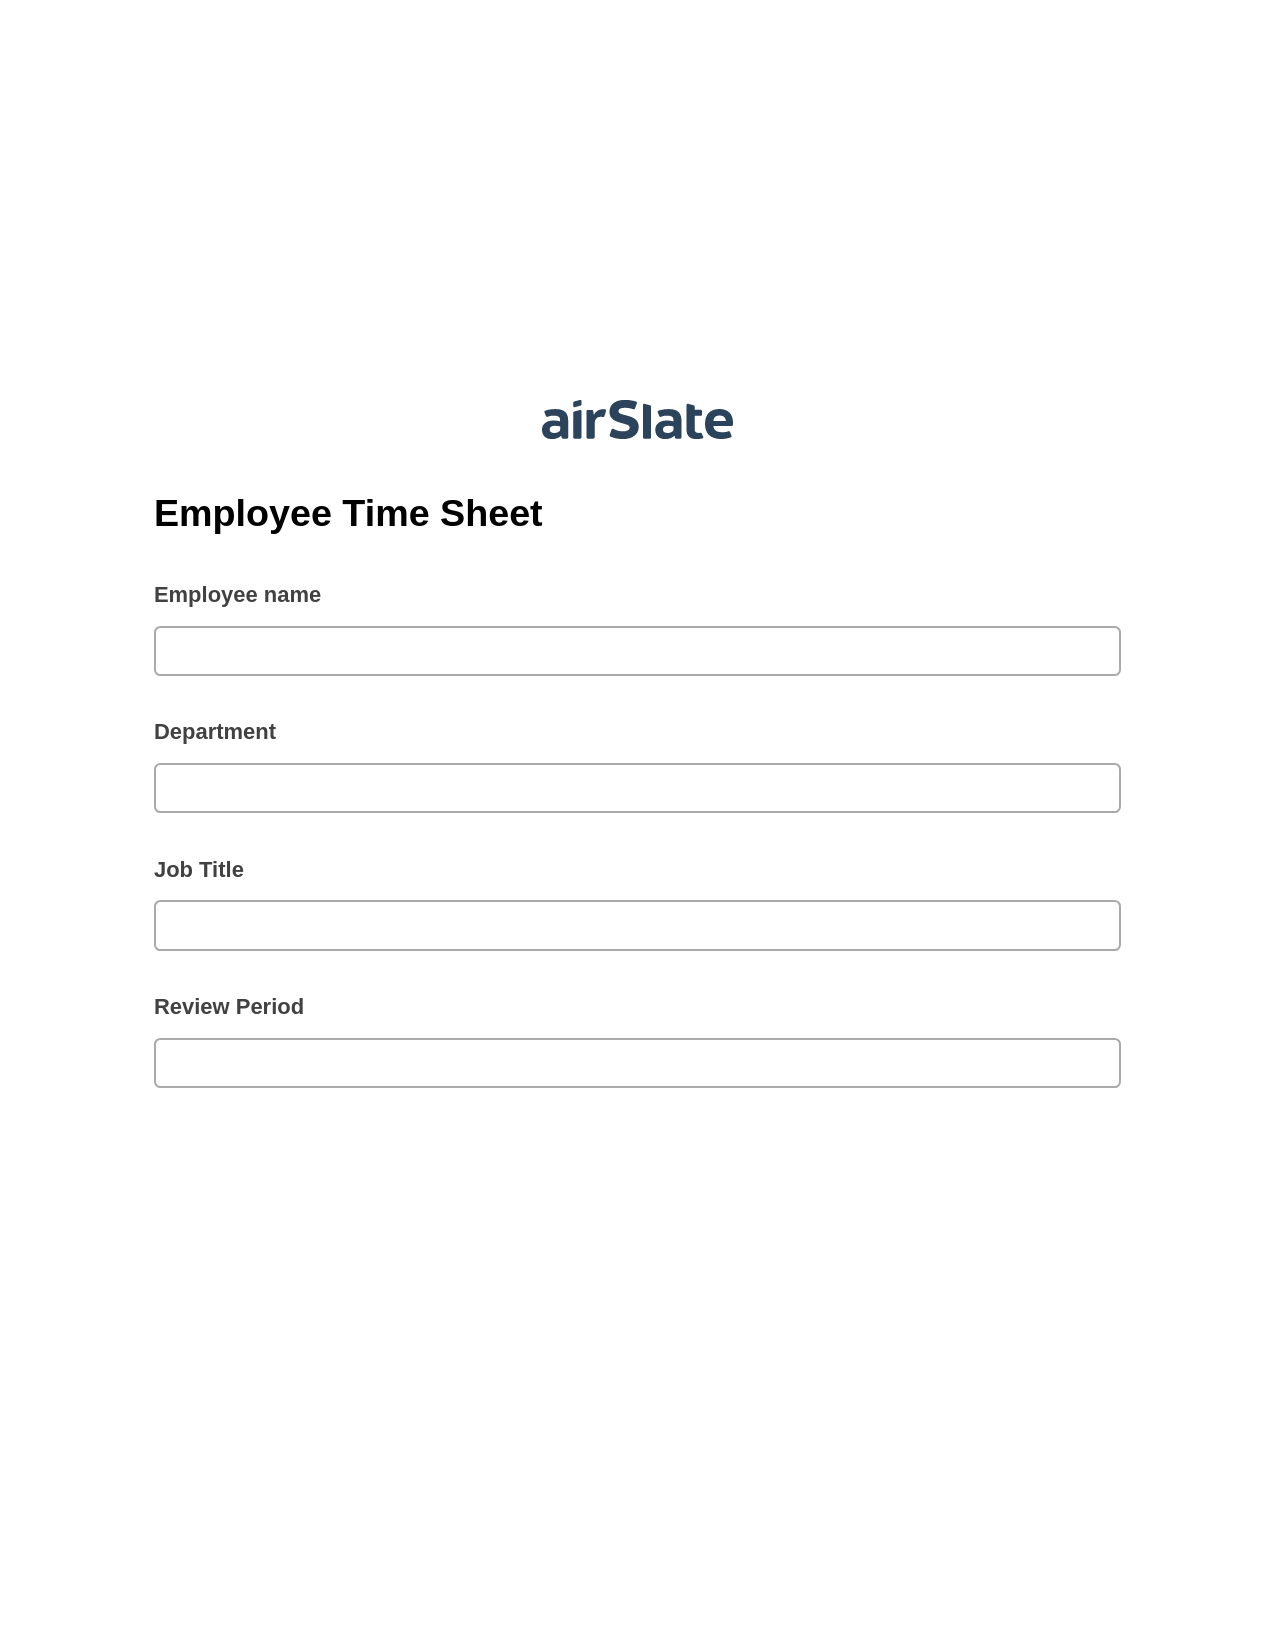 Employee Time Sheet Pre-fill from MS Dynamics 365 Records, Update Audit Trail Bot, Slack Notification Postfinish Bot